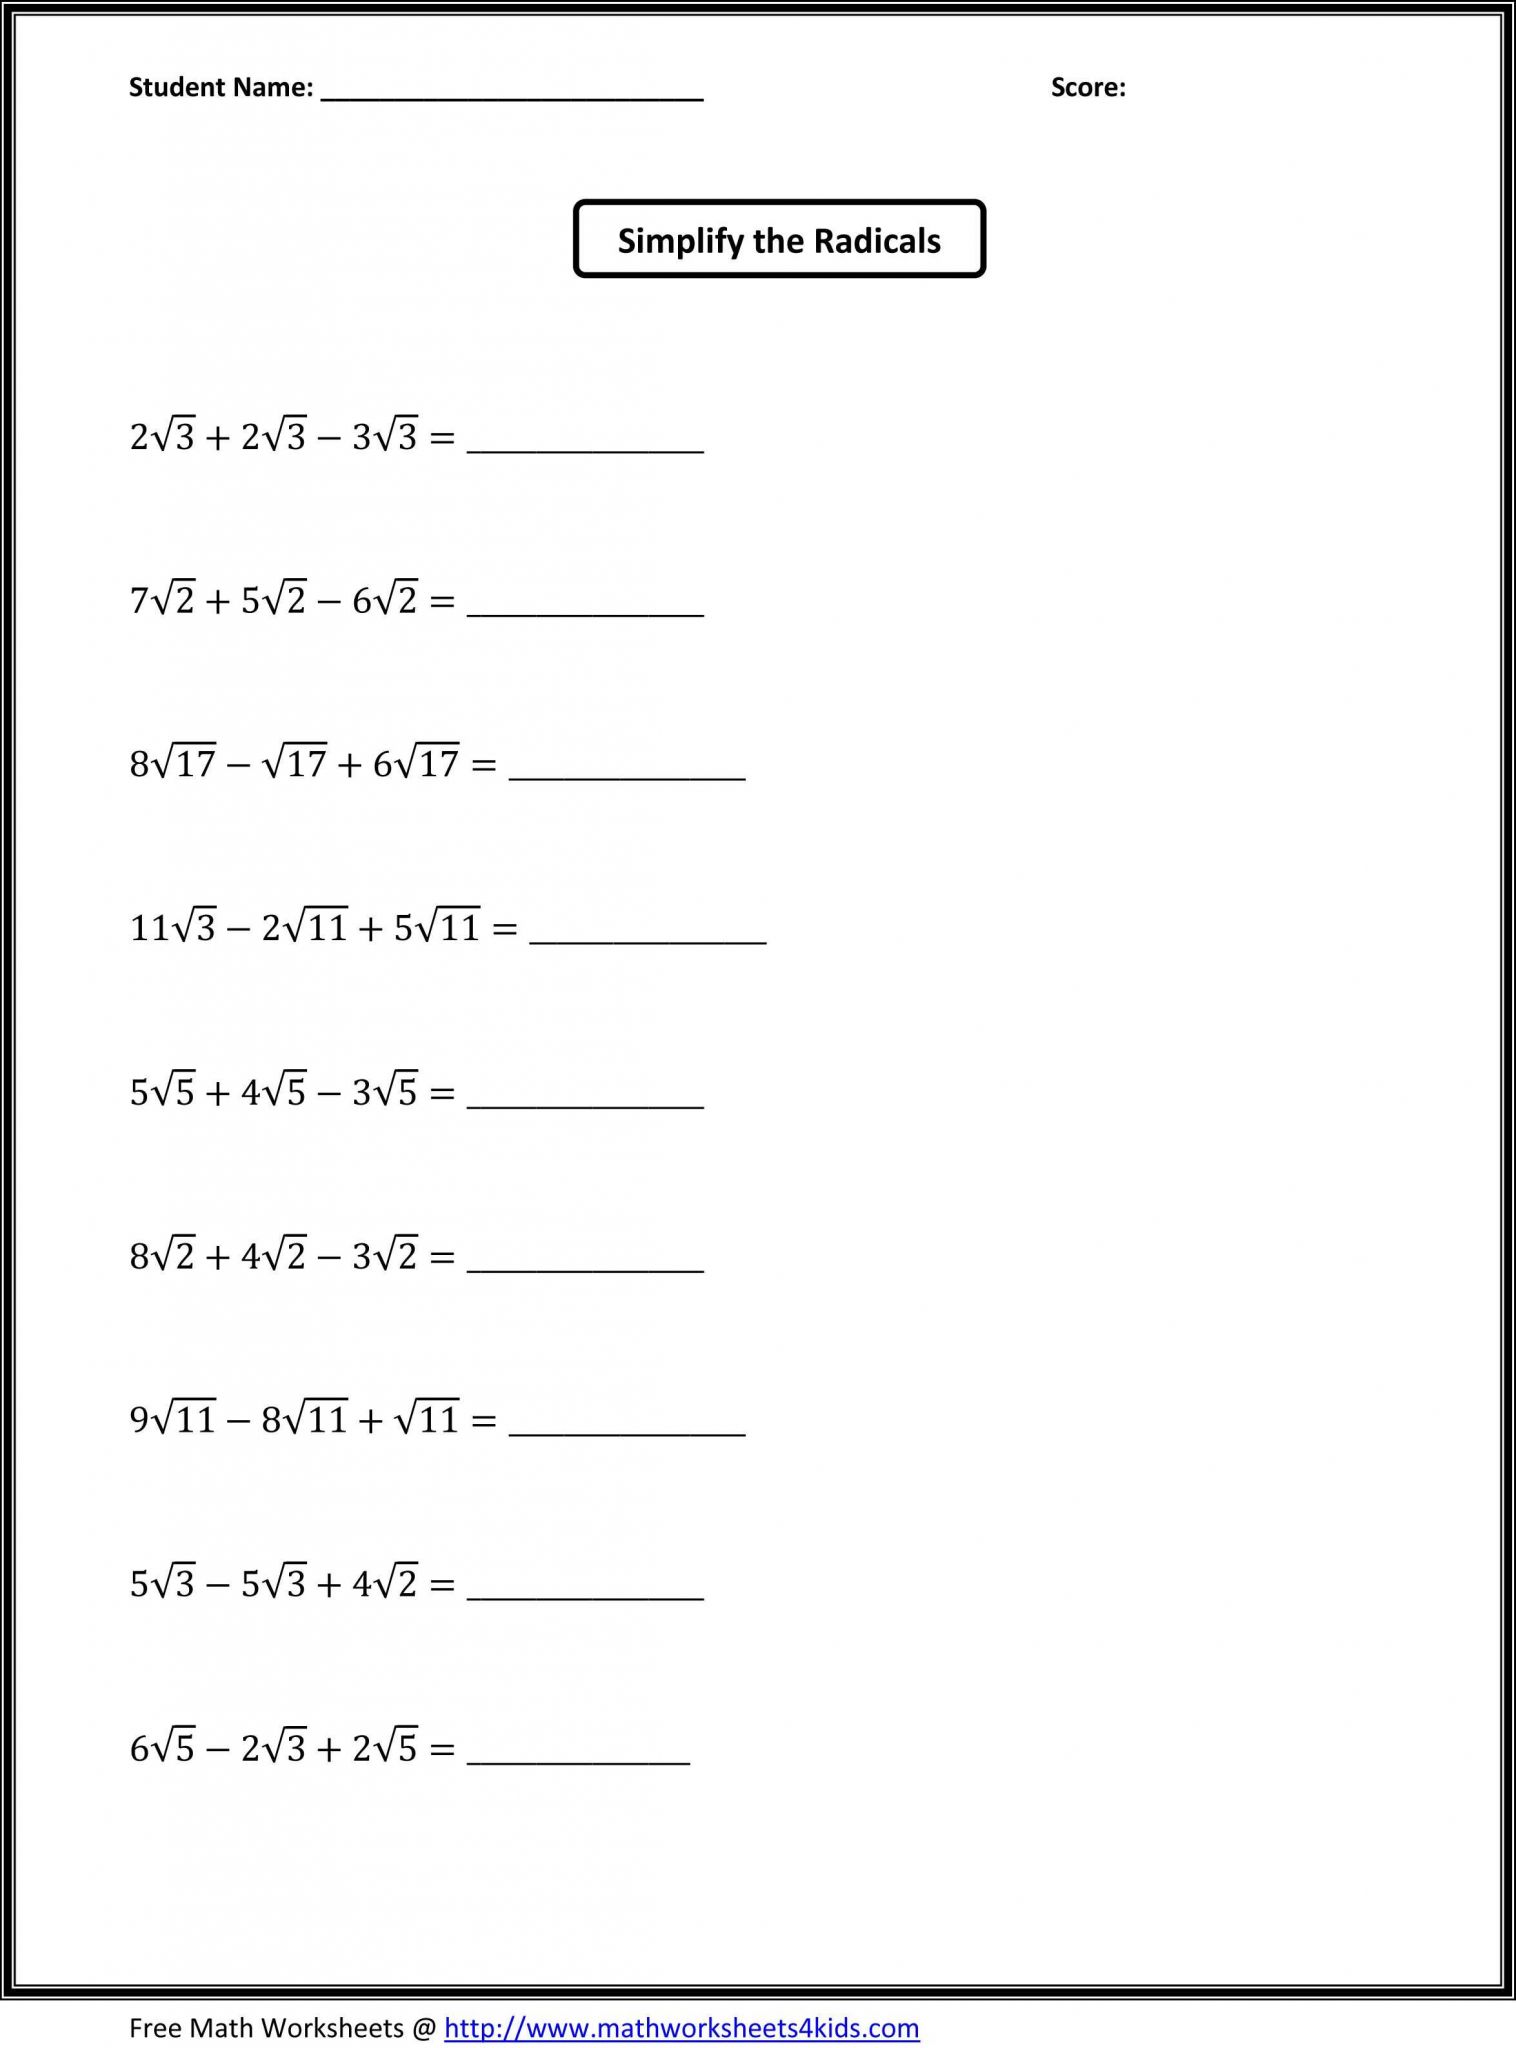 Factoring Polynomials Finding Zeros Of Polynomials Worksheet Answers and 6th Grade Math Worksheets